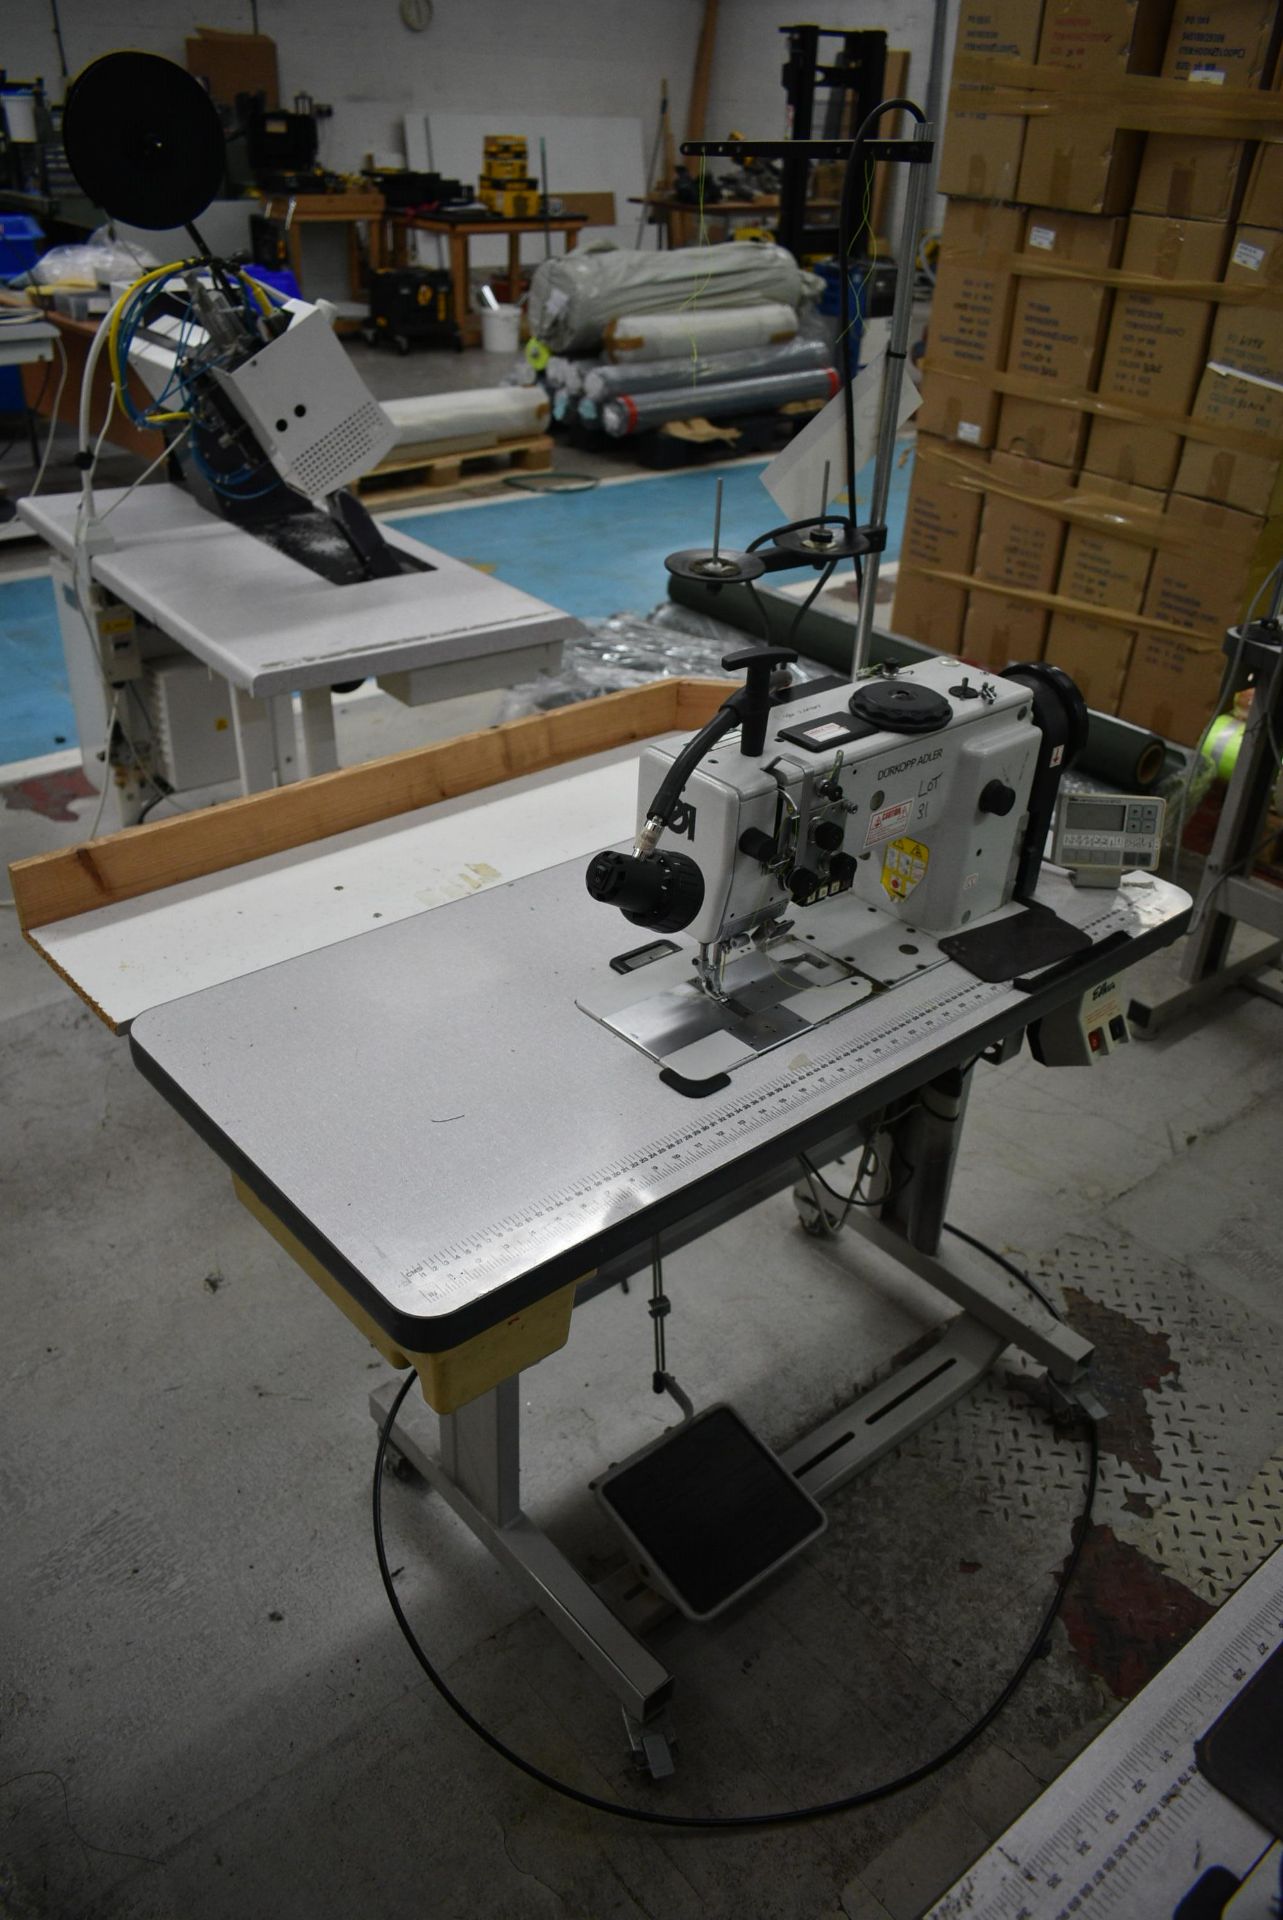 Durkopp Adler 0767 990015 767-FA-373-RAP FLAT BED SEWING MACHINE, serial no. 0767834762, with Efka - Image 2 of 7